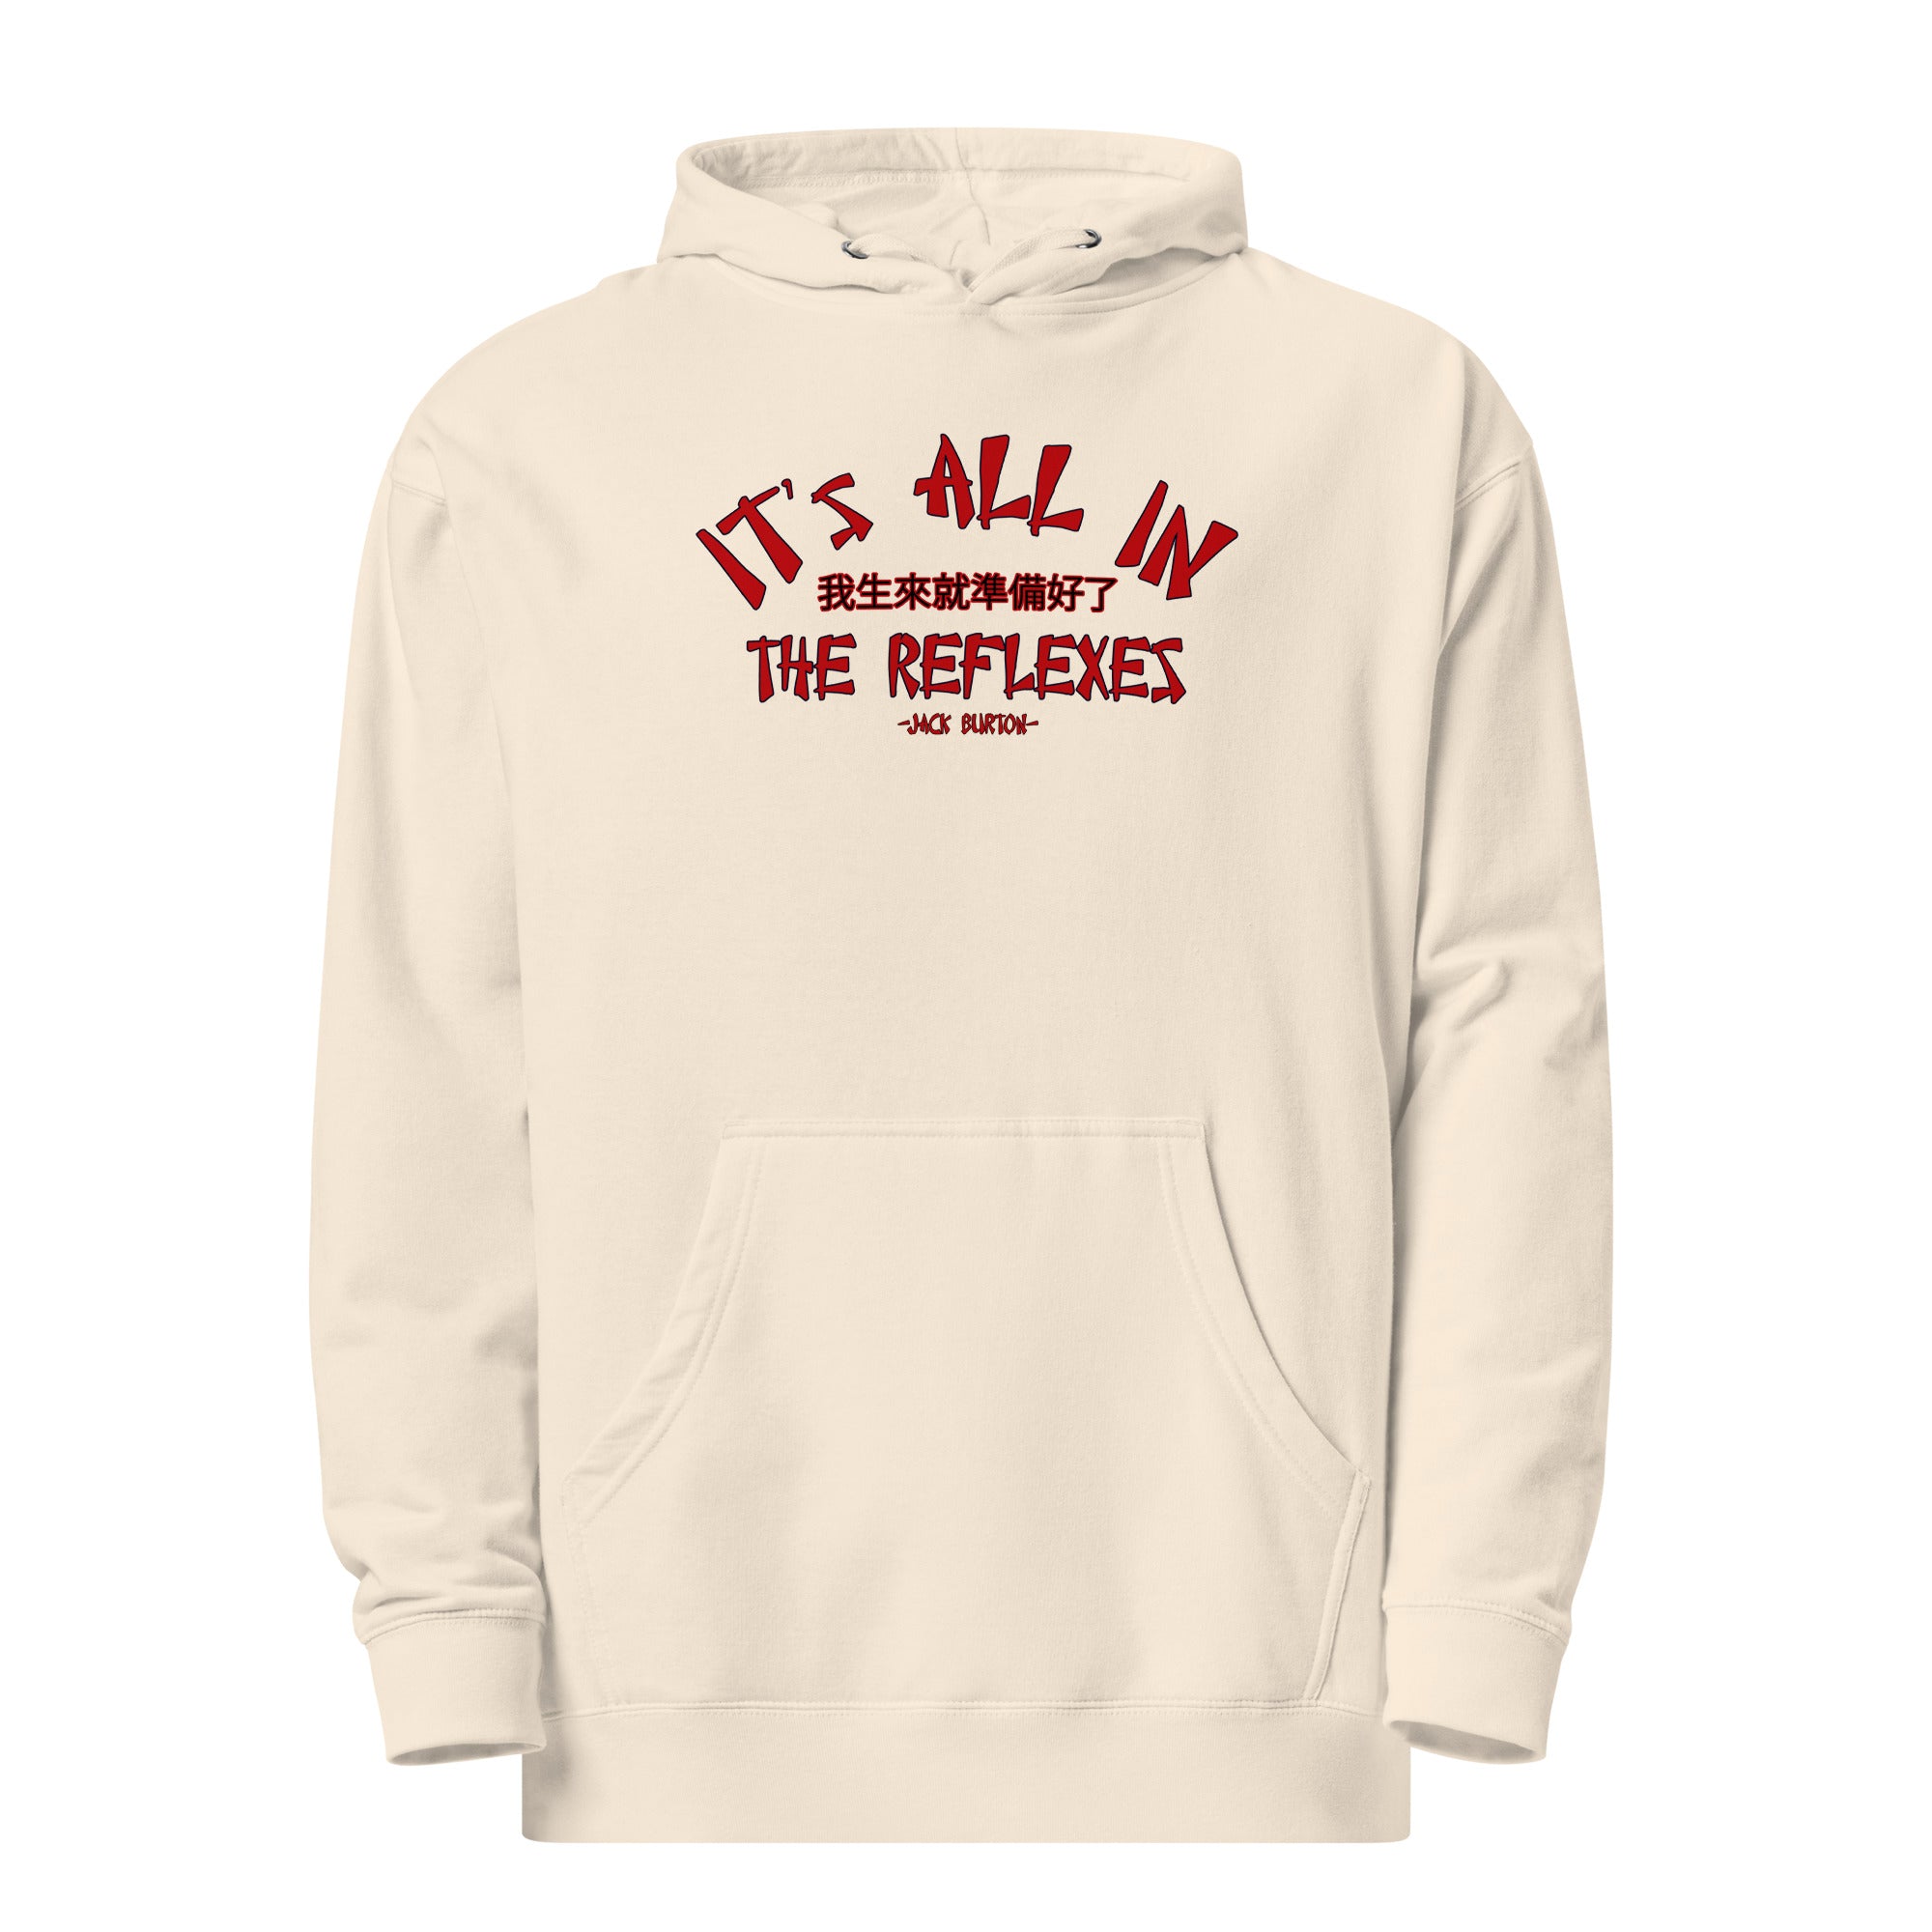 It's All In The Reflexes Unisex midweight hoodie